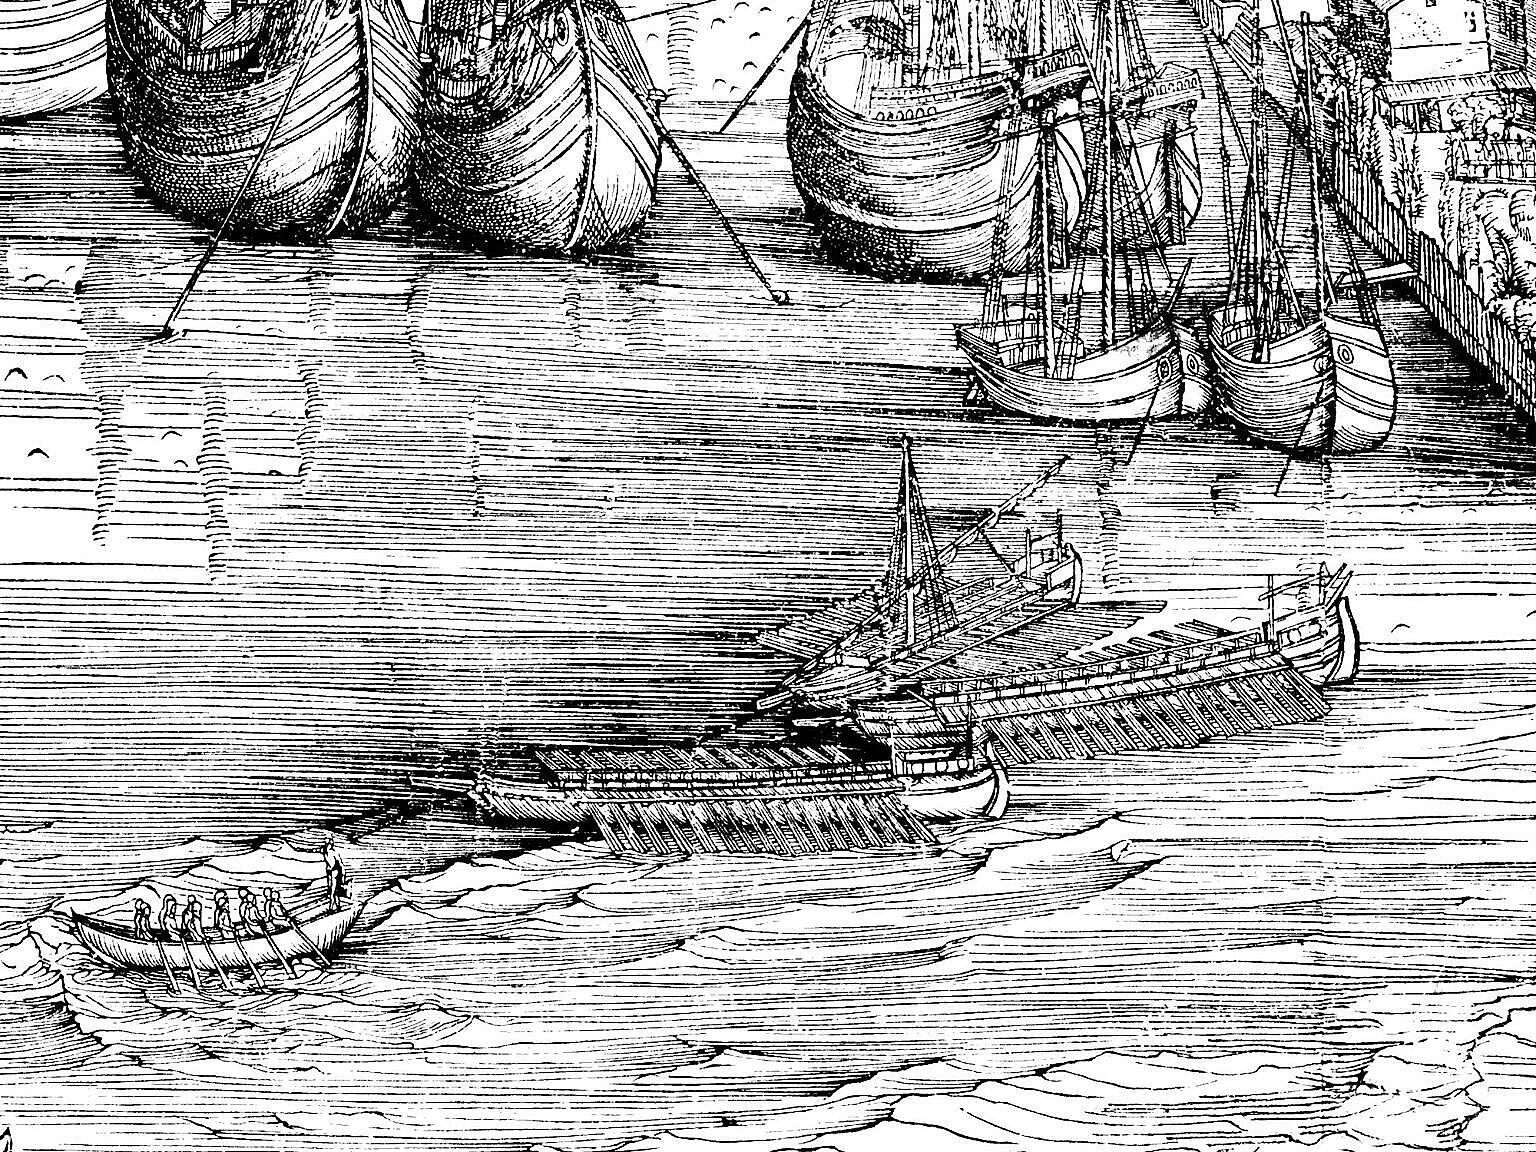 A detail of galleys from the Jacopo de' Barbari view of Venice from 1500.